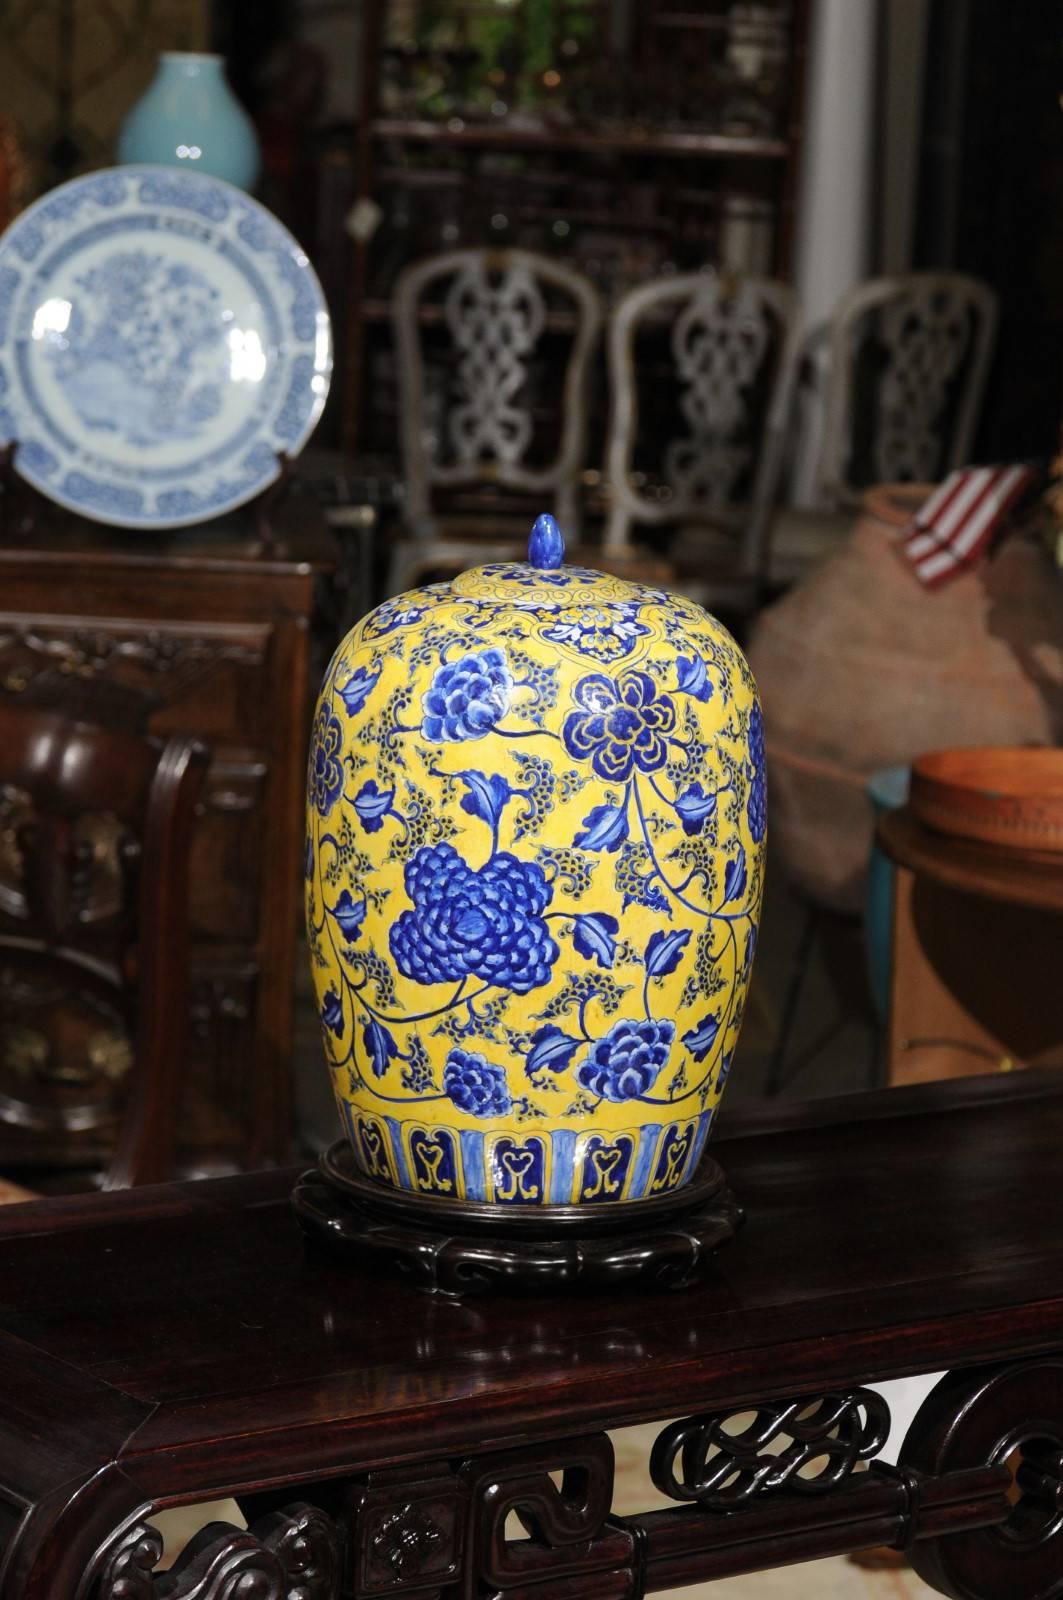 A lovely ginger jar with lid, a round body and tapers at the bottom. It is painted overall with a bold yellow background and beautiful shade of blue floral design. Excellent condition.